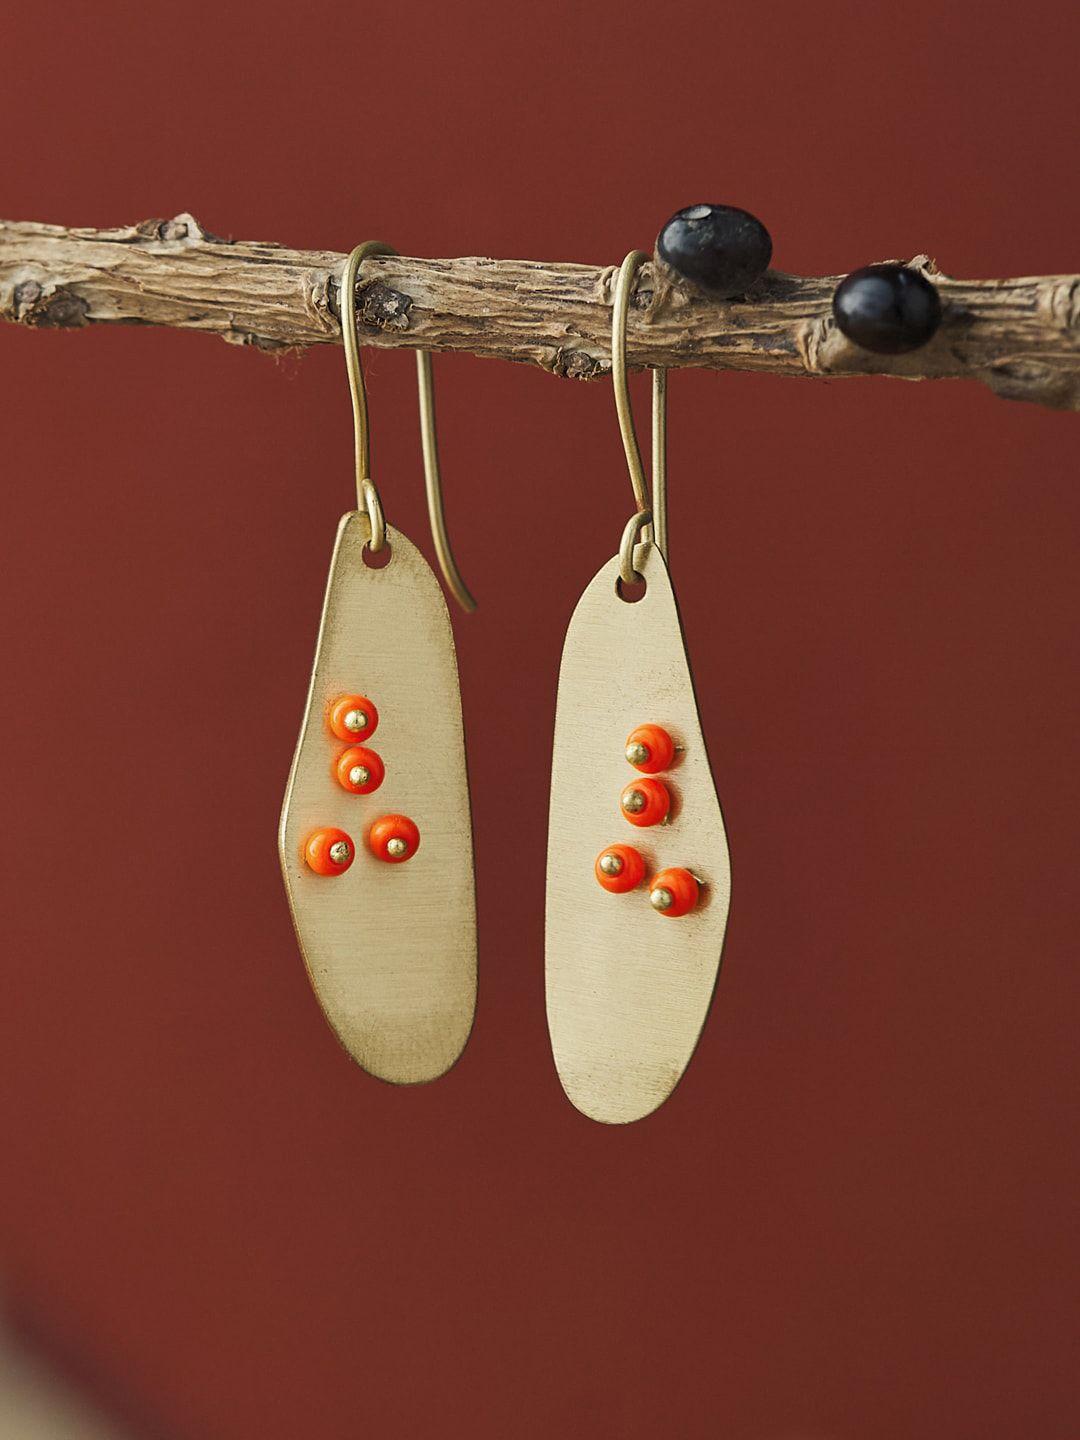 fabindia gold-plated contemporary drop earrings